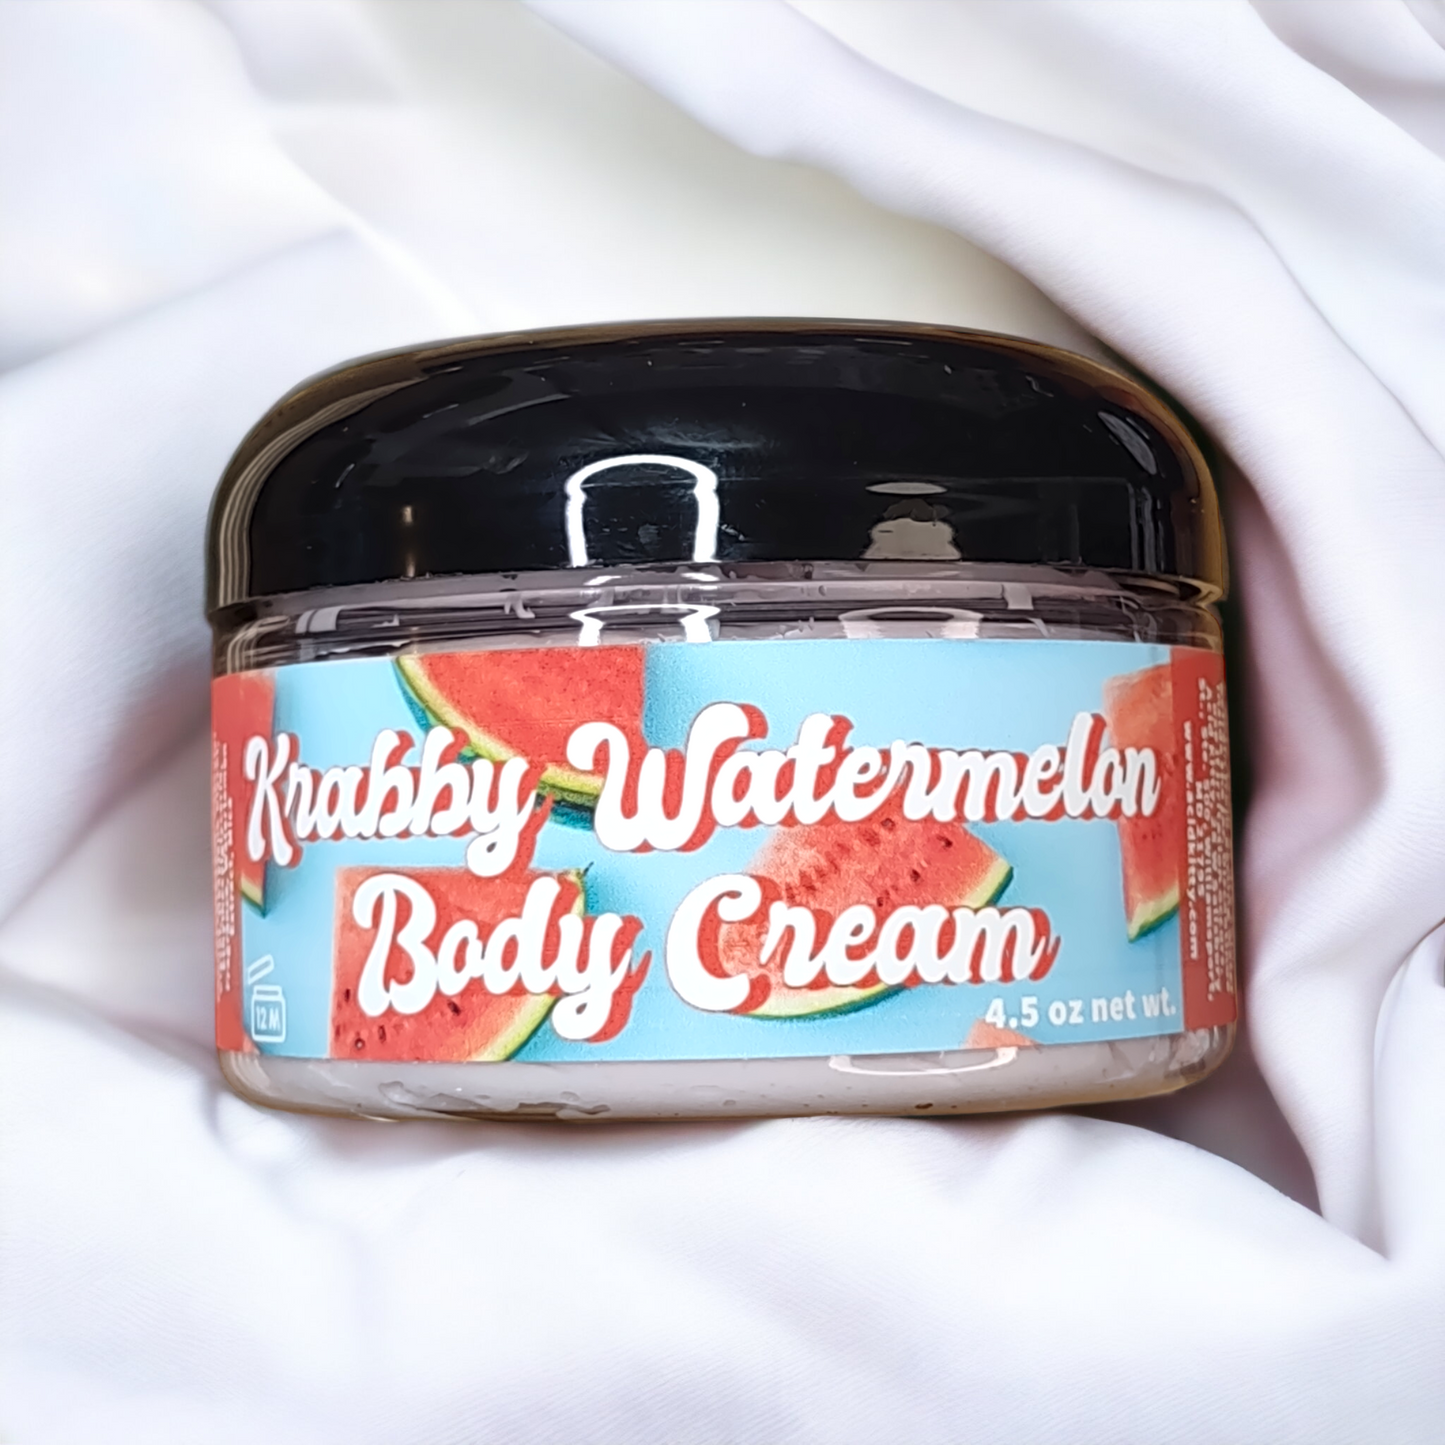 Krabby Watermelon Ultimate Body Cream packaging featuring watermelon slices on a blue background. 